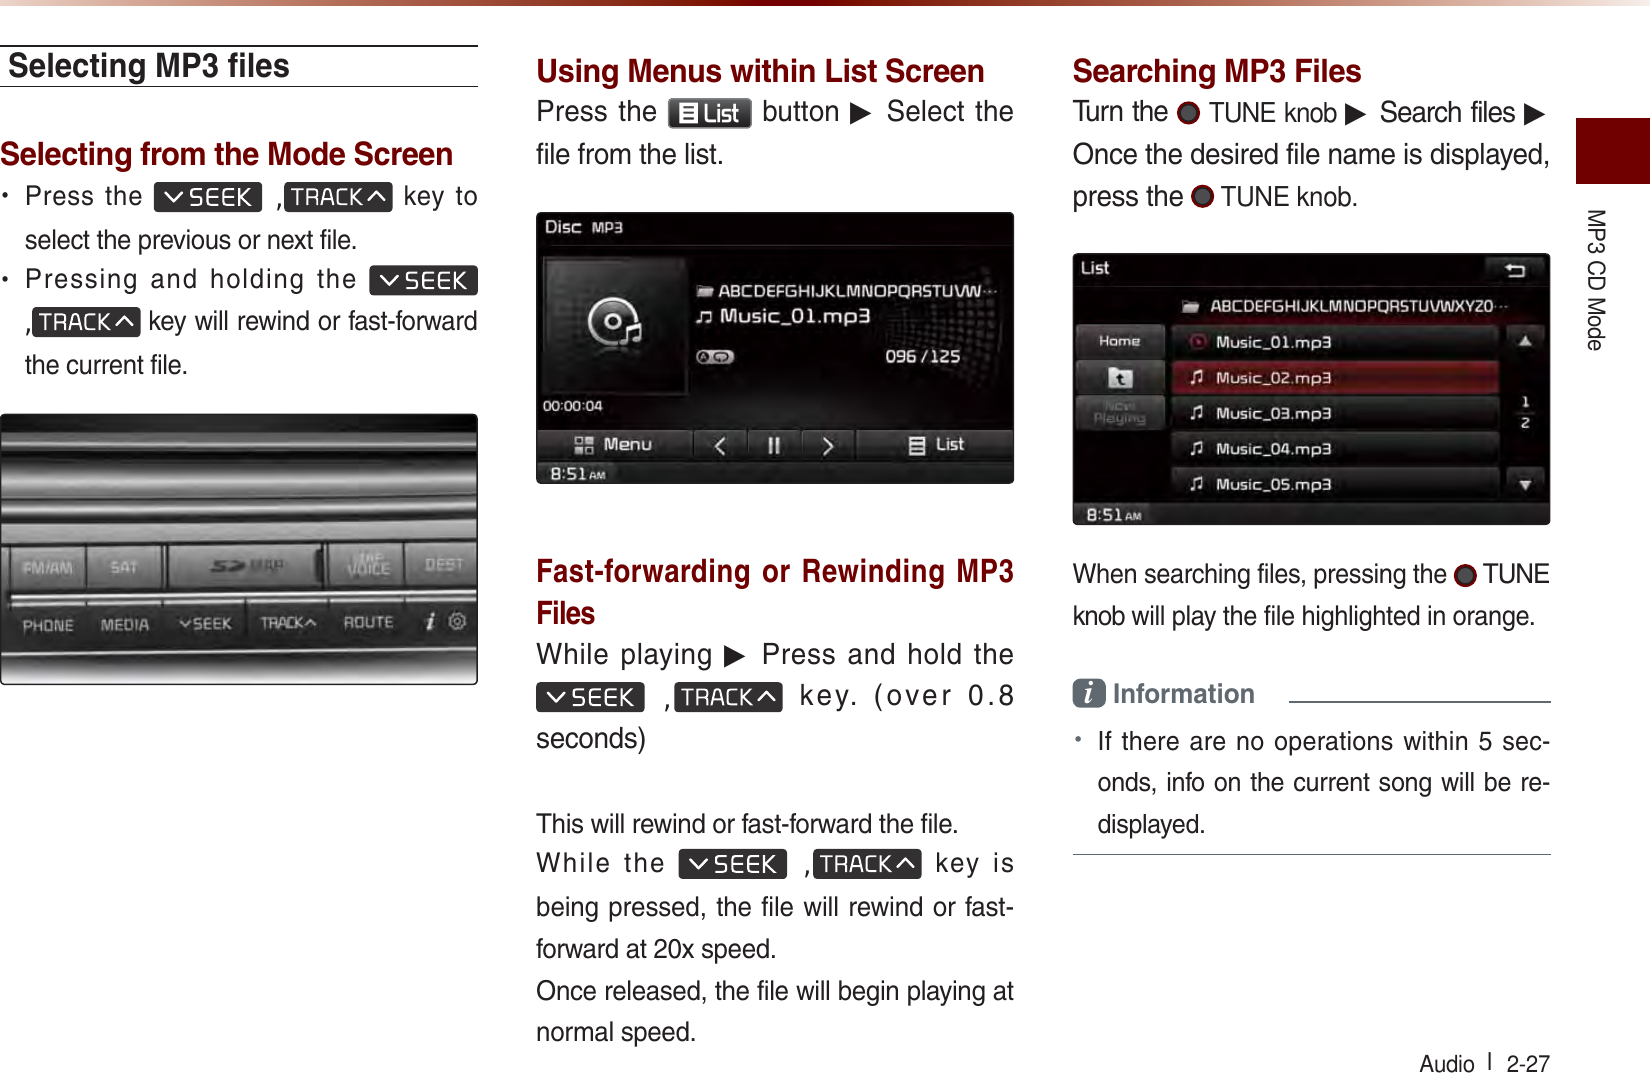 MP3 CD Mode Audio l  2-27 Selecting MP3 ﬁ lesSelecting from the Mode Screen• Press the  , key to select the previous or next file.• Pressing and holding the  , key will rewind or fast-forward the current file.Using Menus within List ScreenPress the /LVW button ▶ Select the file from the list.Fast-forwarding or Rewinding MP3 FilesWhile playing ▶ Press and hold the  ,  key. (over 0.8 seconds)This will rewind or fast-forward the file.While the  , key is being pressed, the file will rewind or fast-forward at 20x speed.Once released, the file will begin playing at normal speed.Searching MP3 FilesTurn the  TUNE knob ▶ Search files ▶ Once the desired file name is displayed, press the  TUNE knob.When searching files, pressing the   TUNE knob will play the file highlighted in orange.i Information • If there are no operations within 5 sec-onds, info on the current song will be re-displayed.